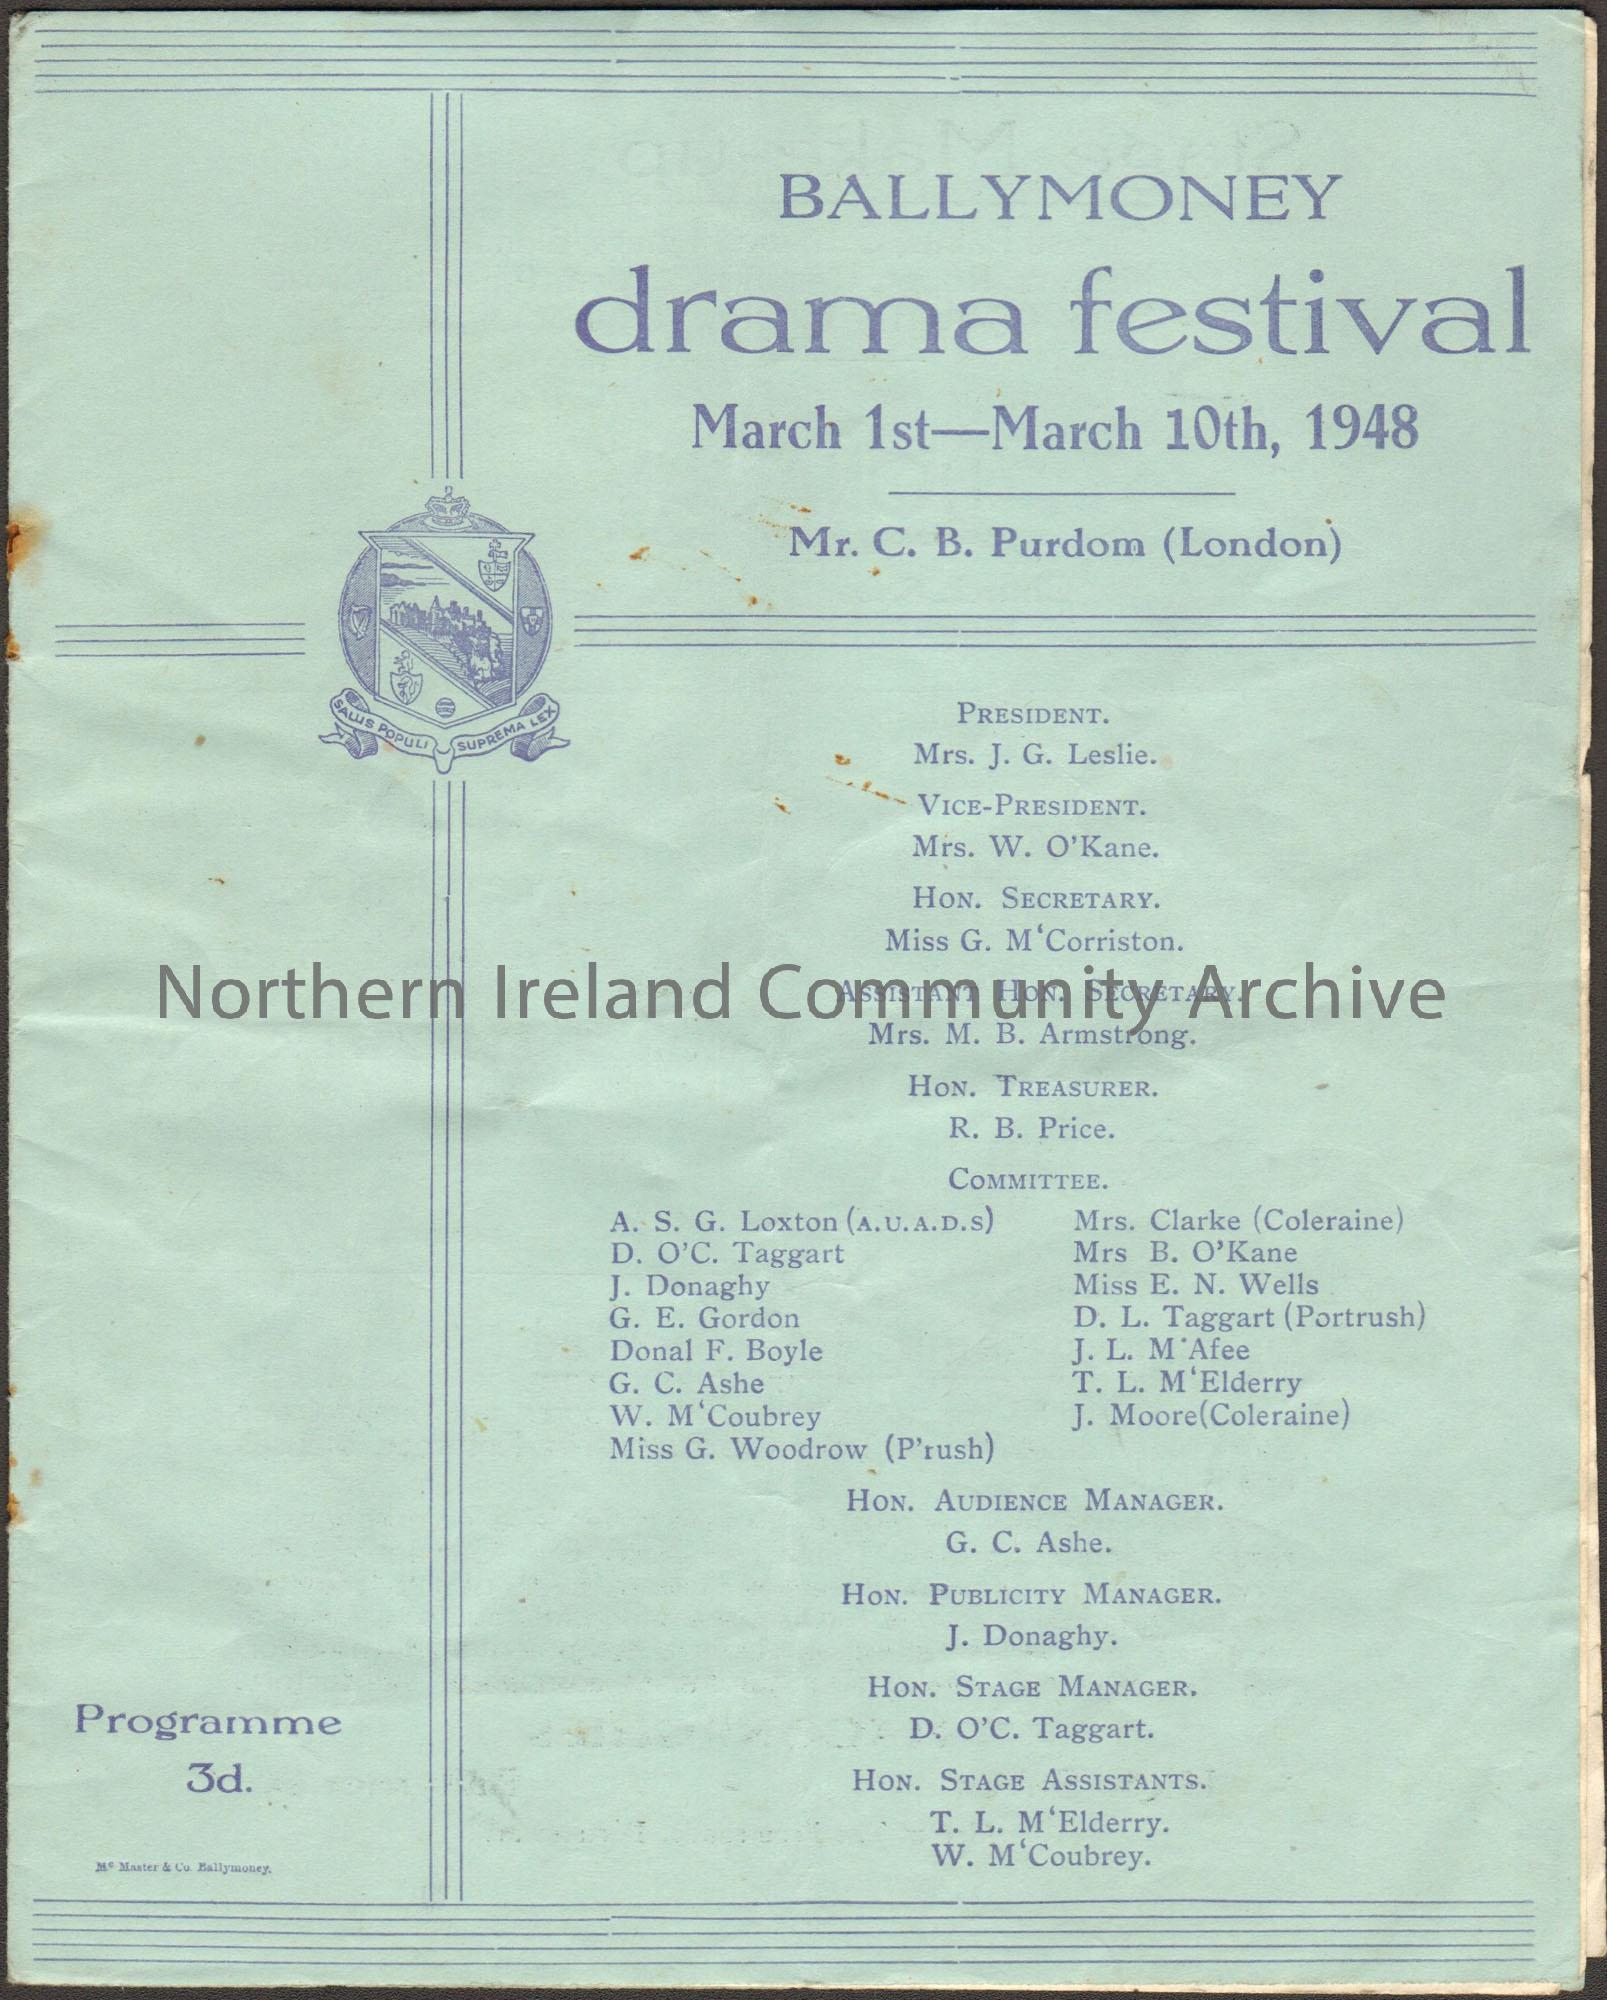 Light blue Ballymoney drama festival programme from 1948, with crest